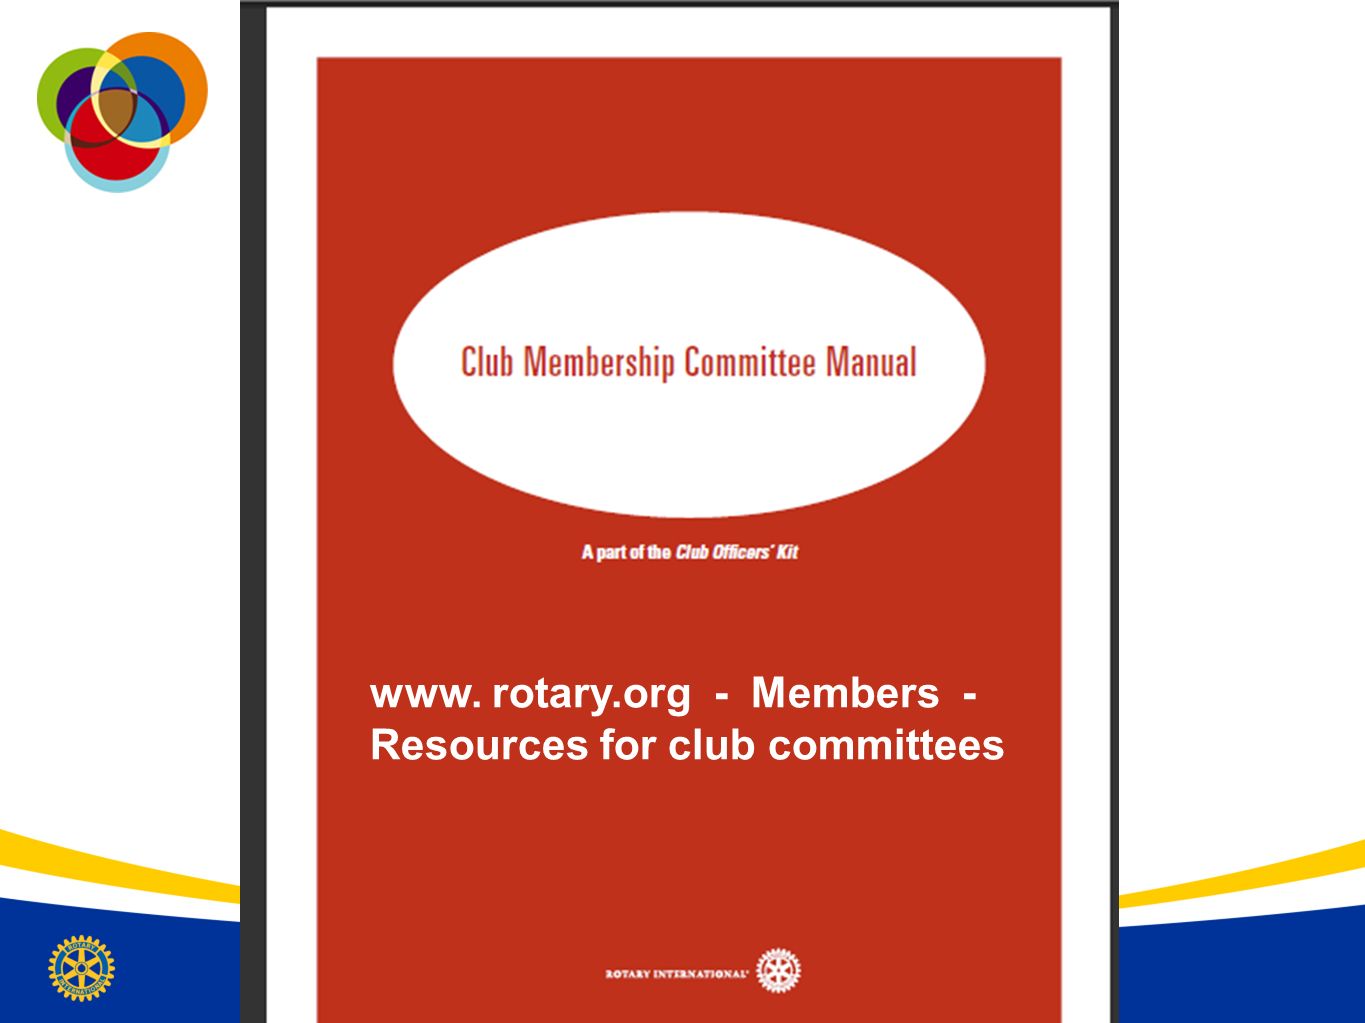 www. rotary.org - Members - Resources for club committees